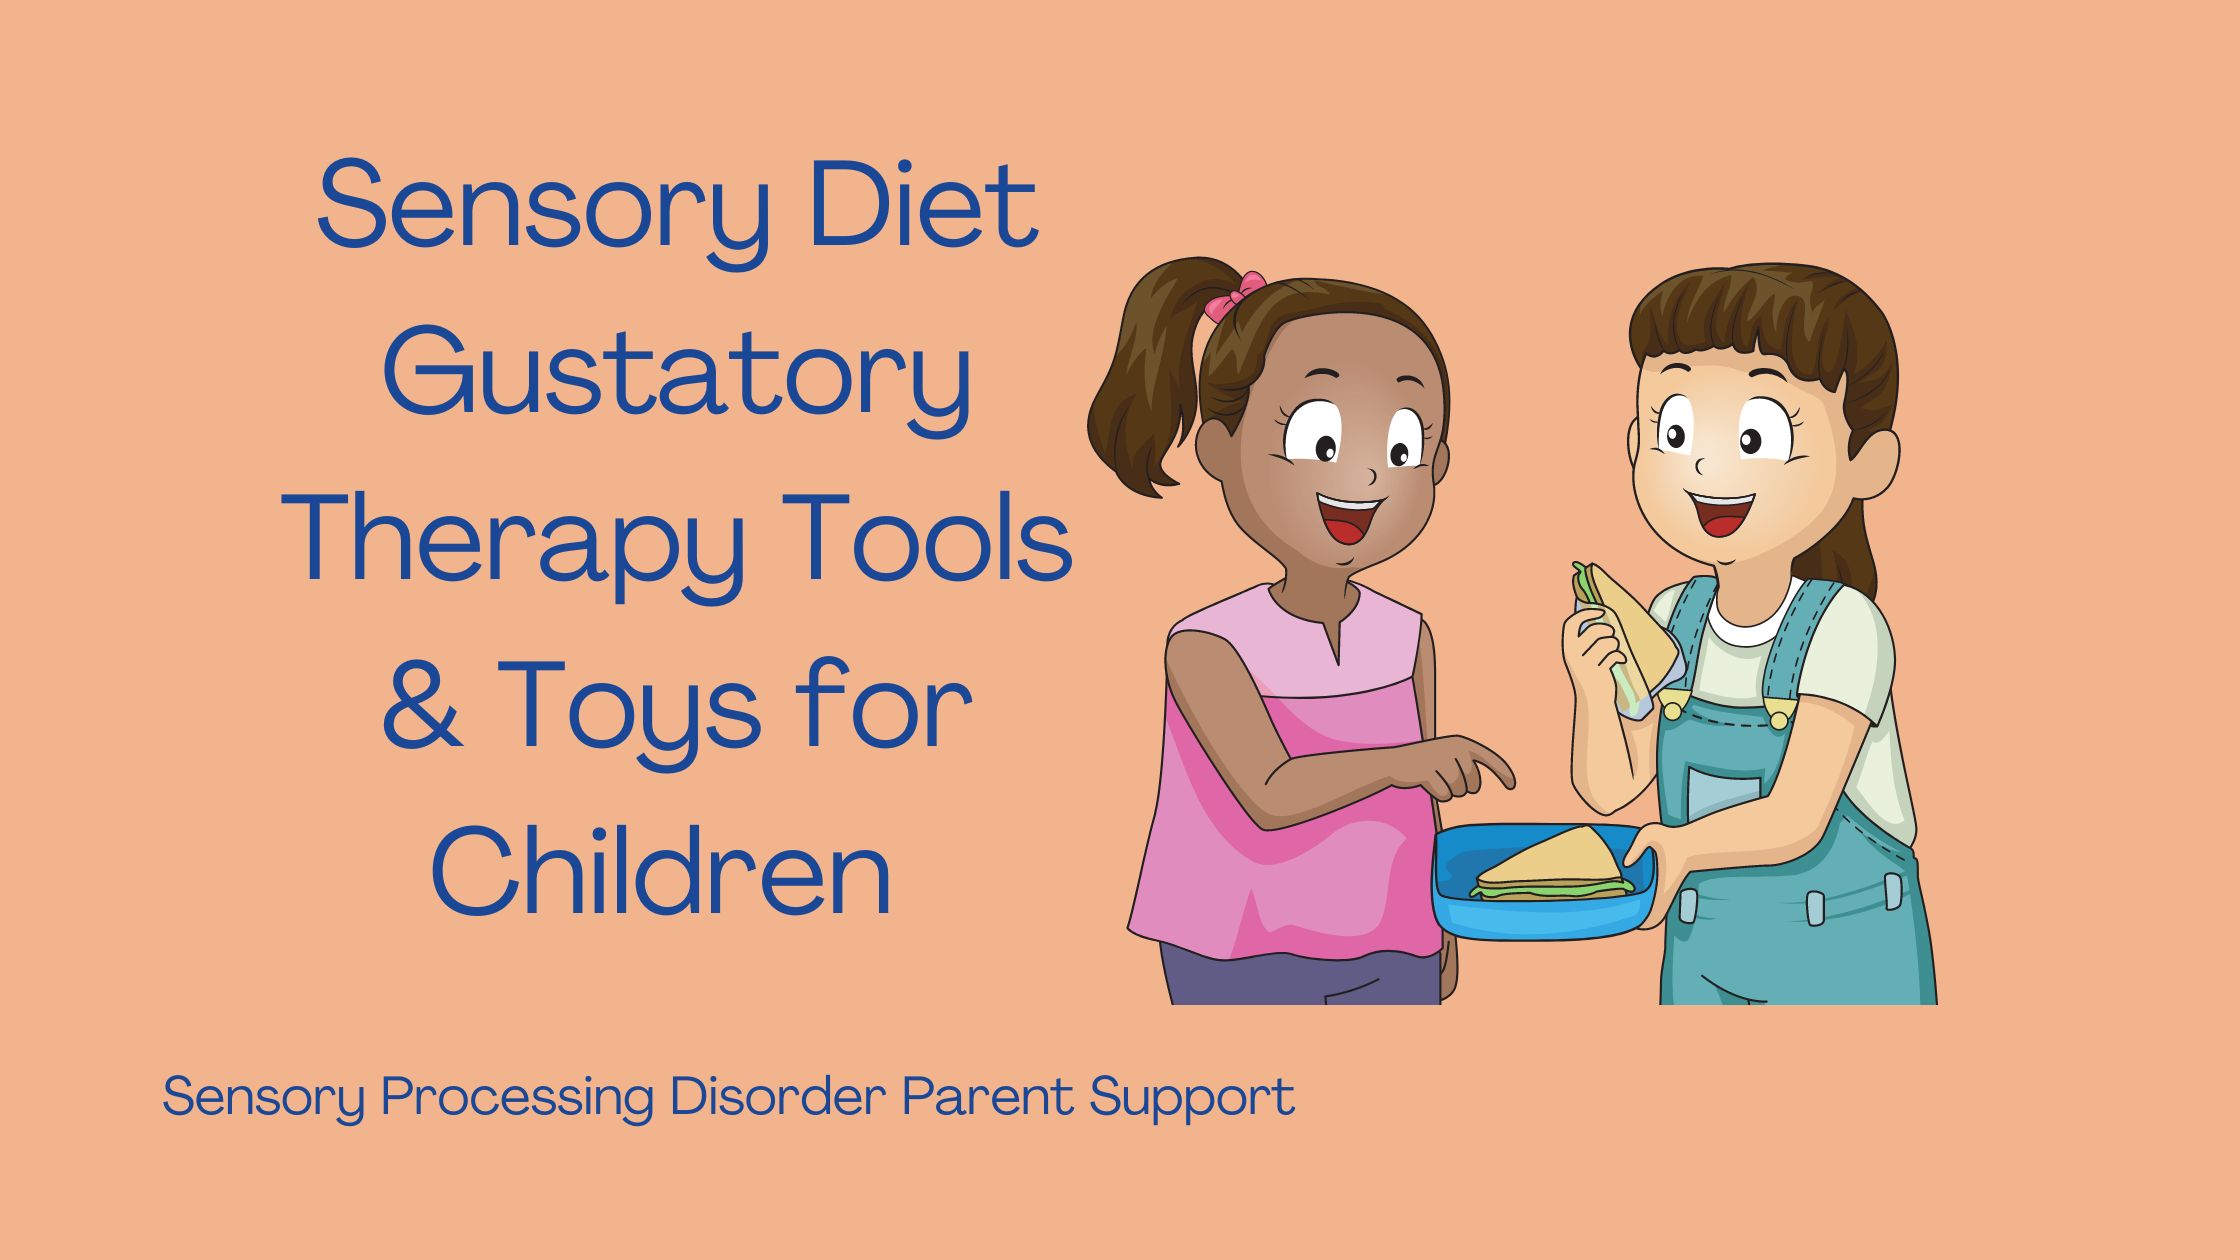 two children with sensory needs sharing a lunch Sensory Diet Gustatory Therapy Tools & Toys for Children